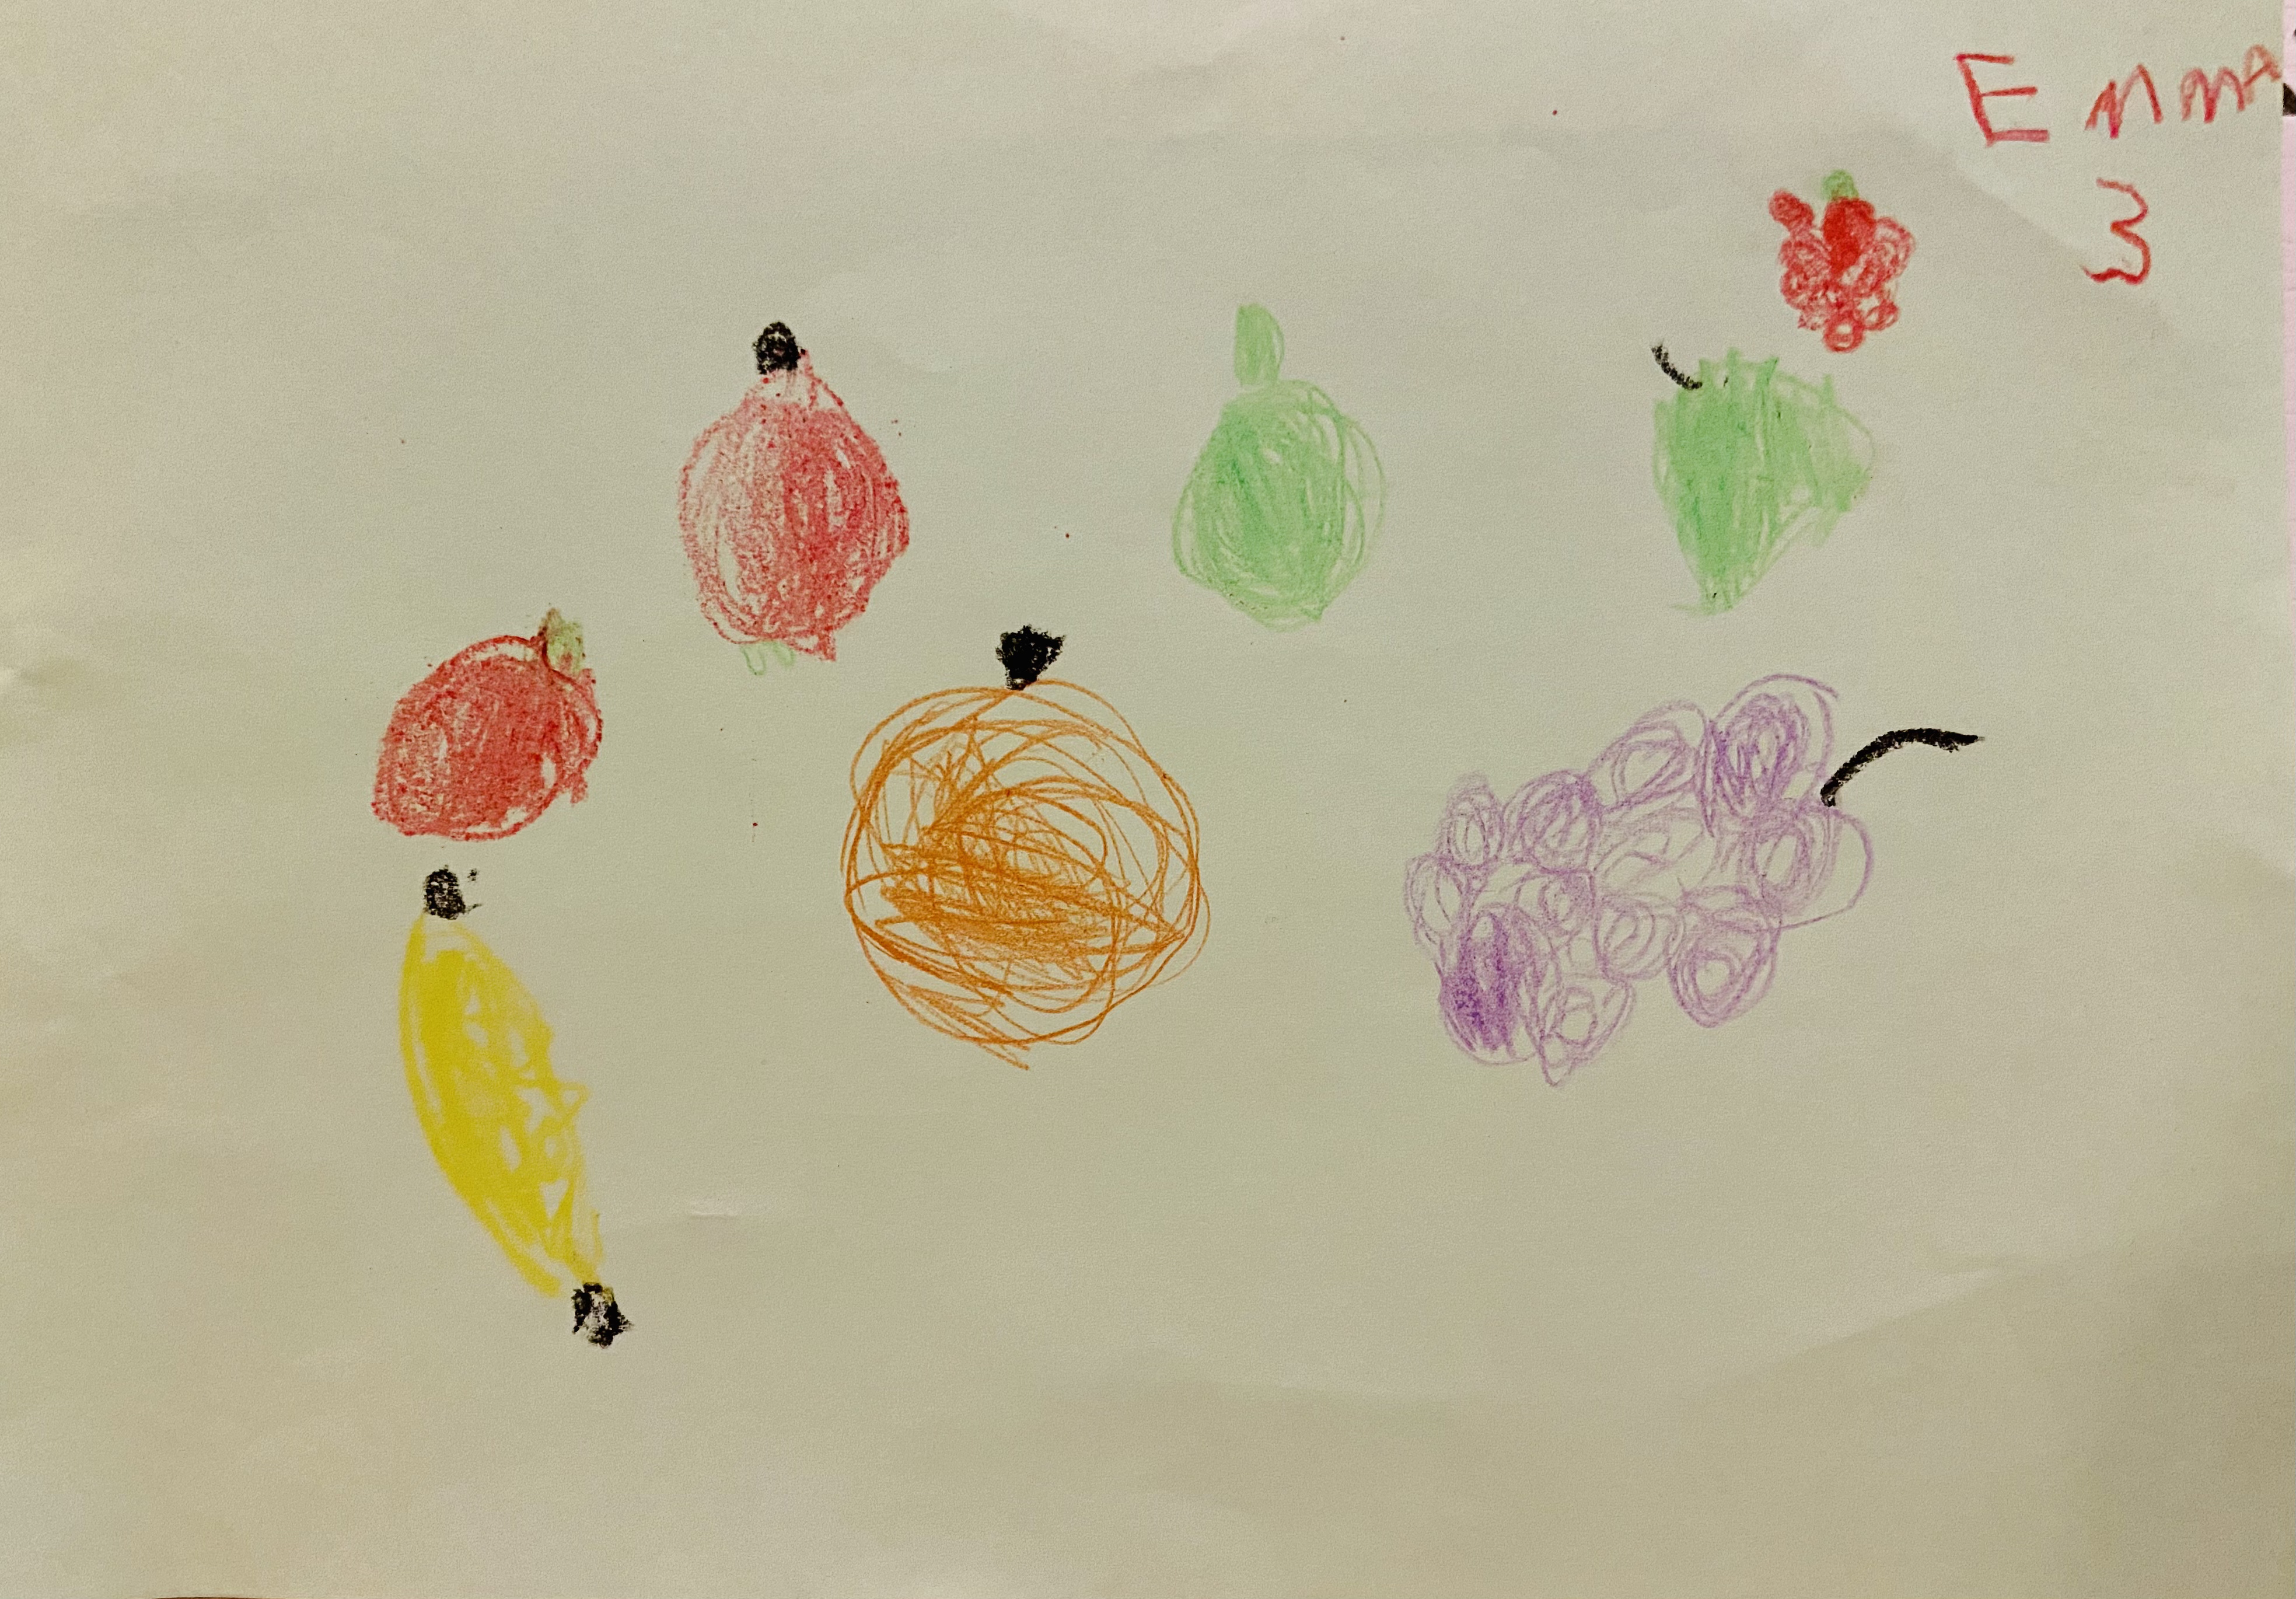 'Fruit Plate' by Emma (3) from Dublin